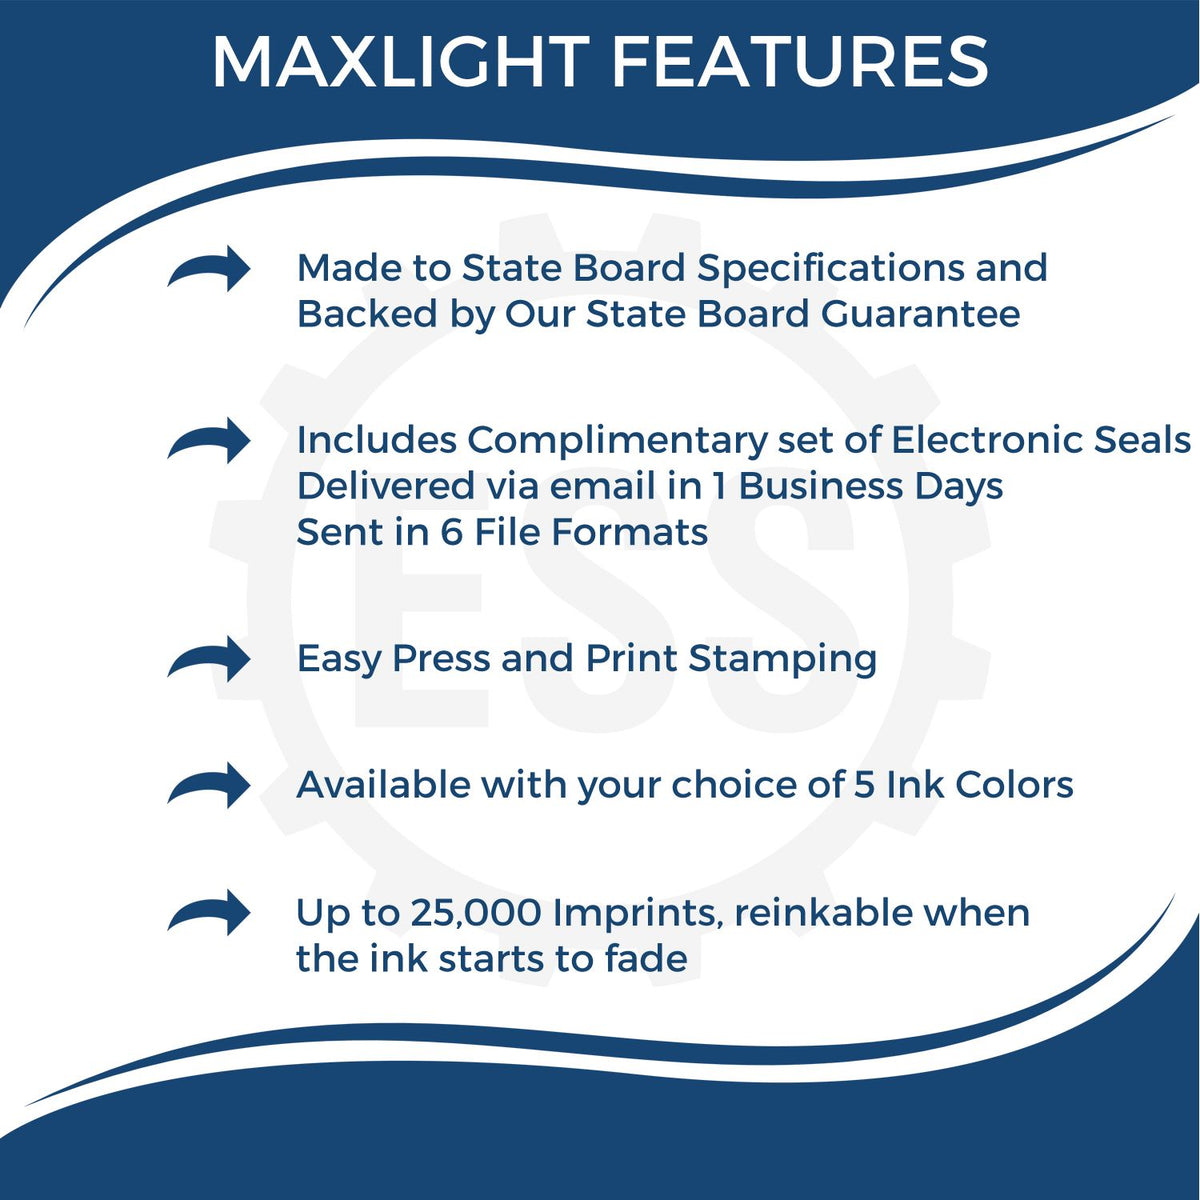 A picture of an infographic highlighting the selling points for the Premium MaxLight Pre-Inked Utah Engineering Stamp